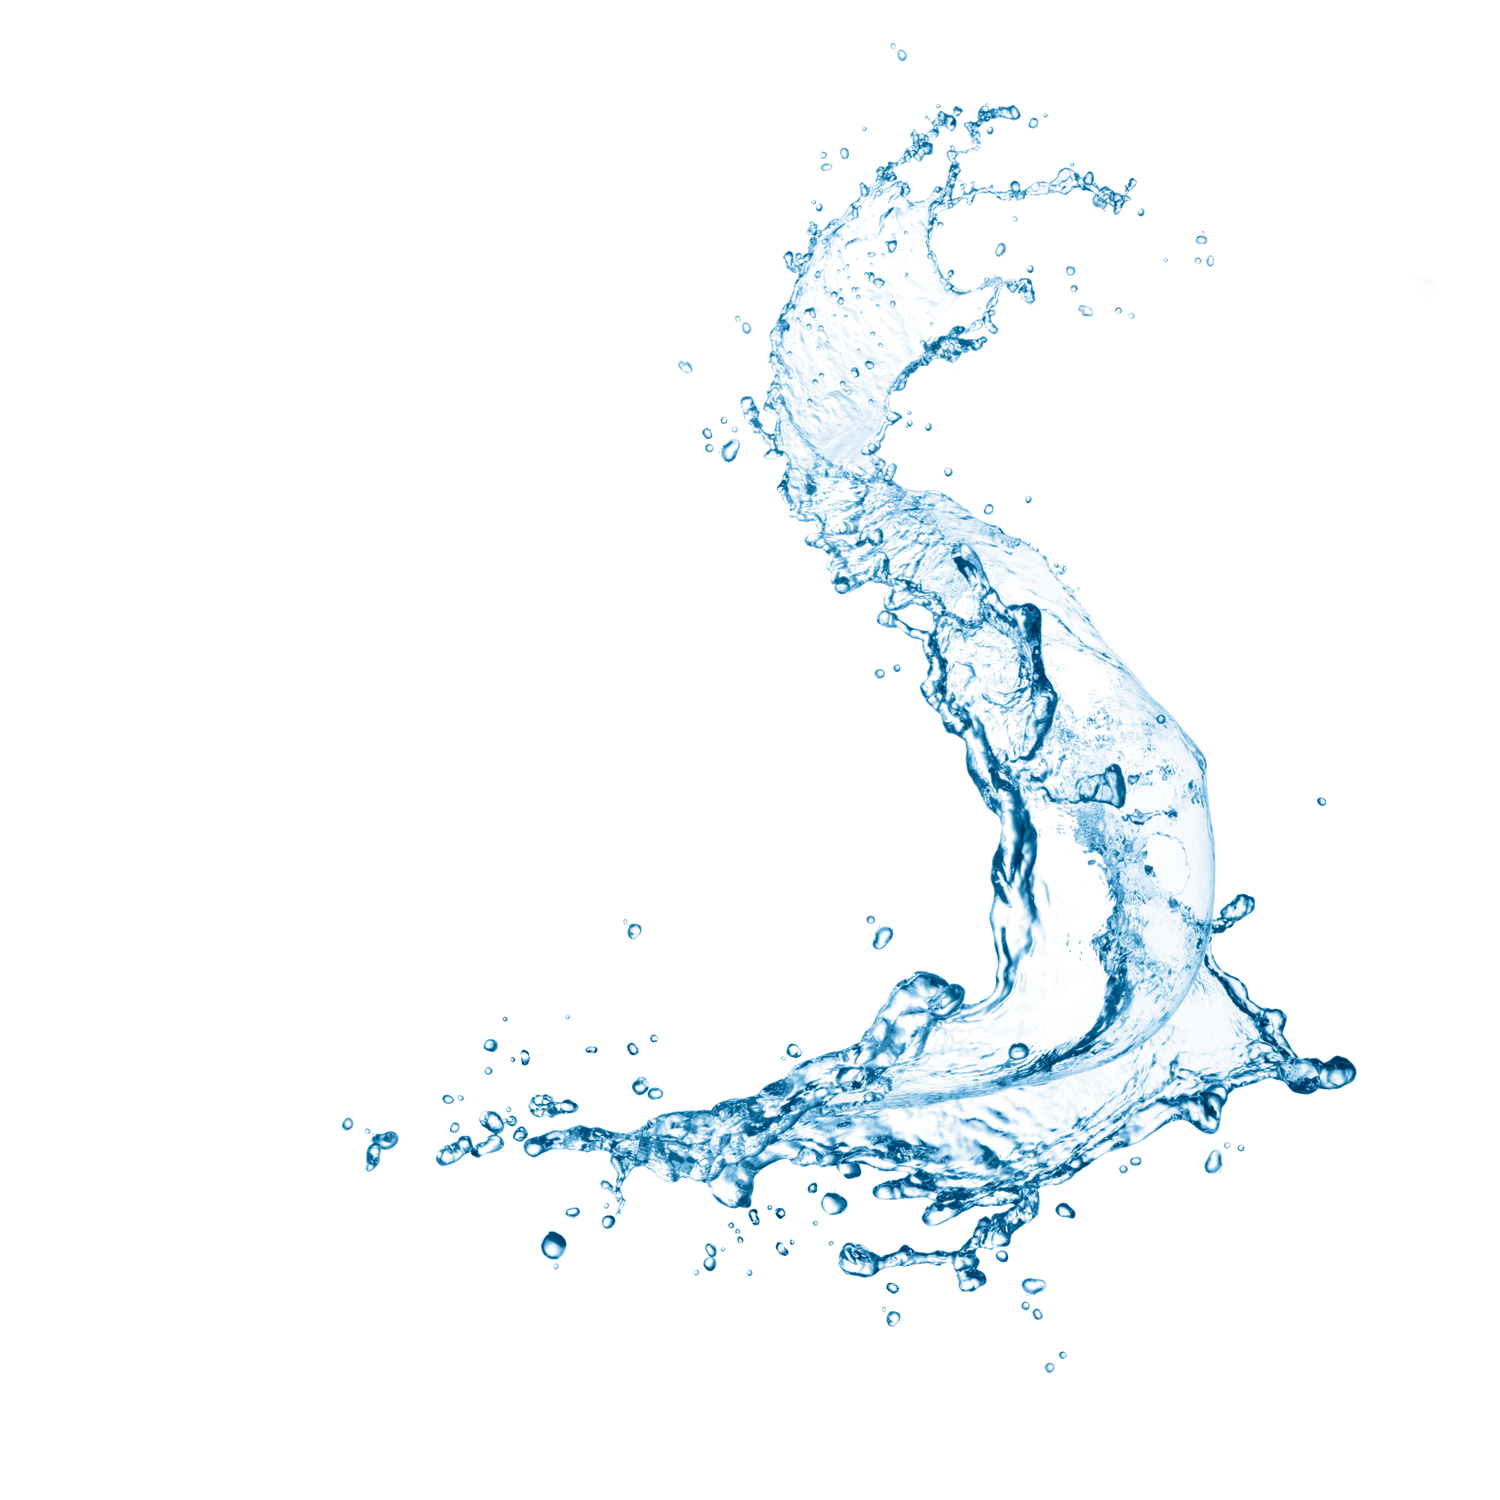 A splash of water in an S-shape on a white background